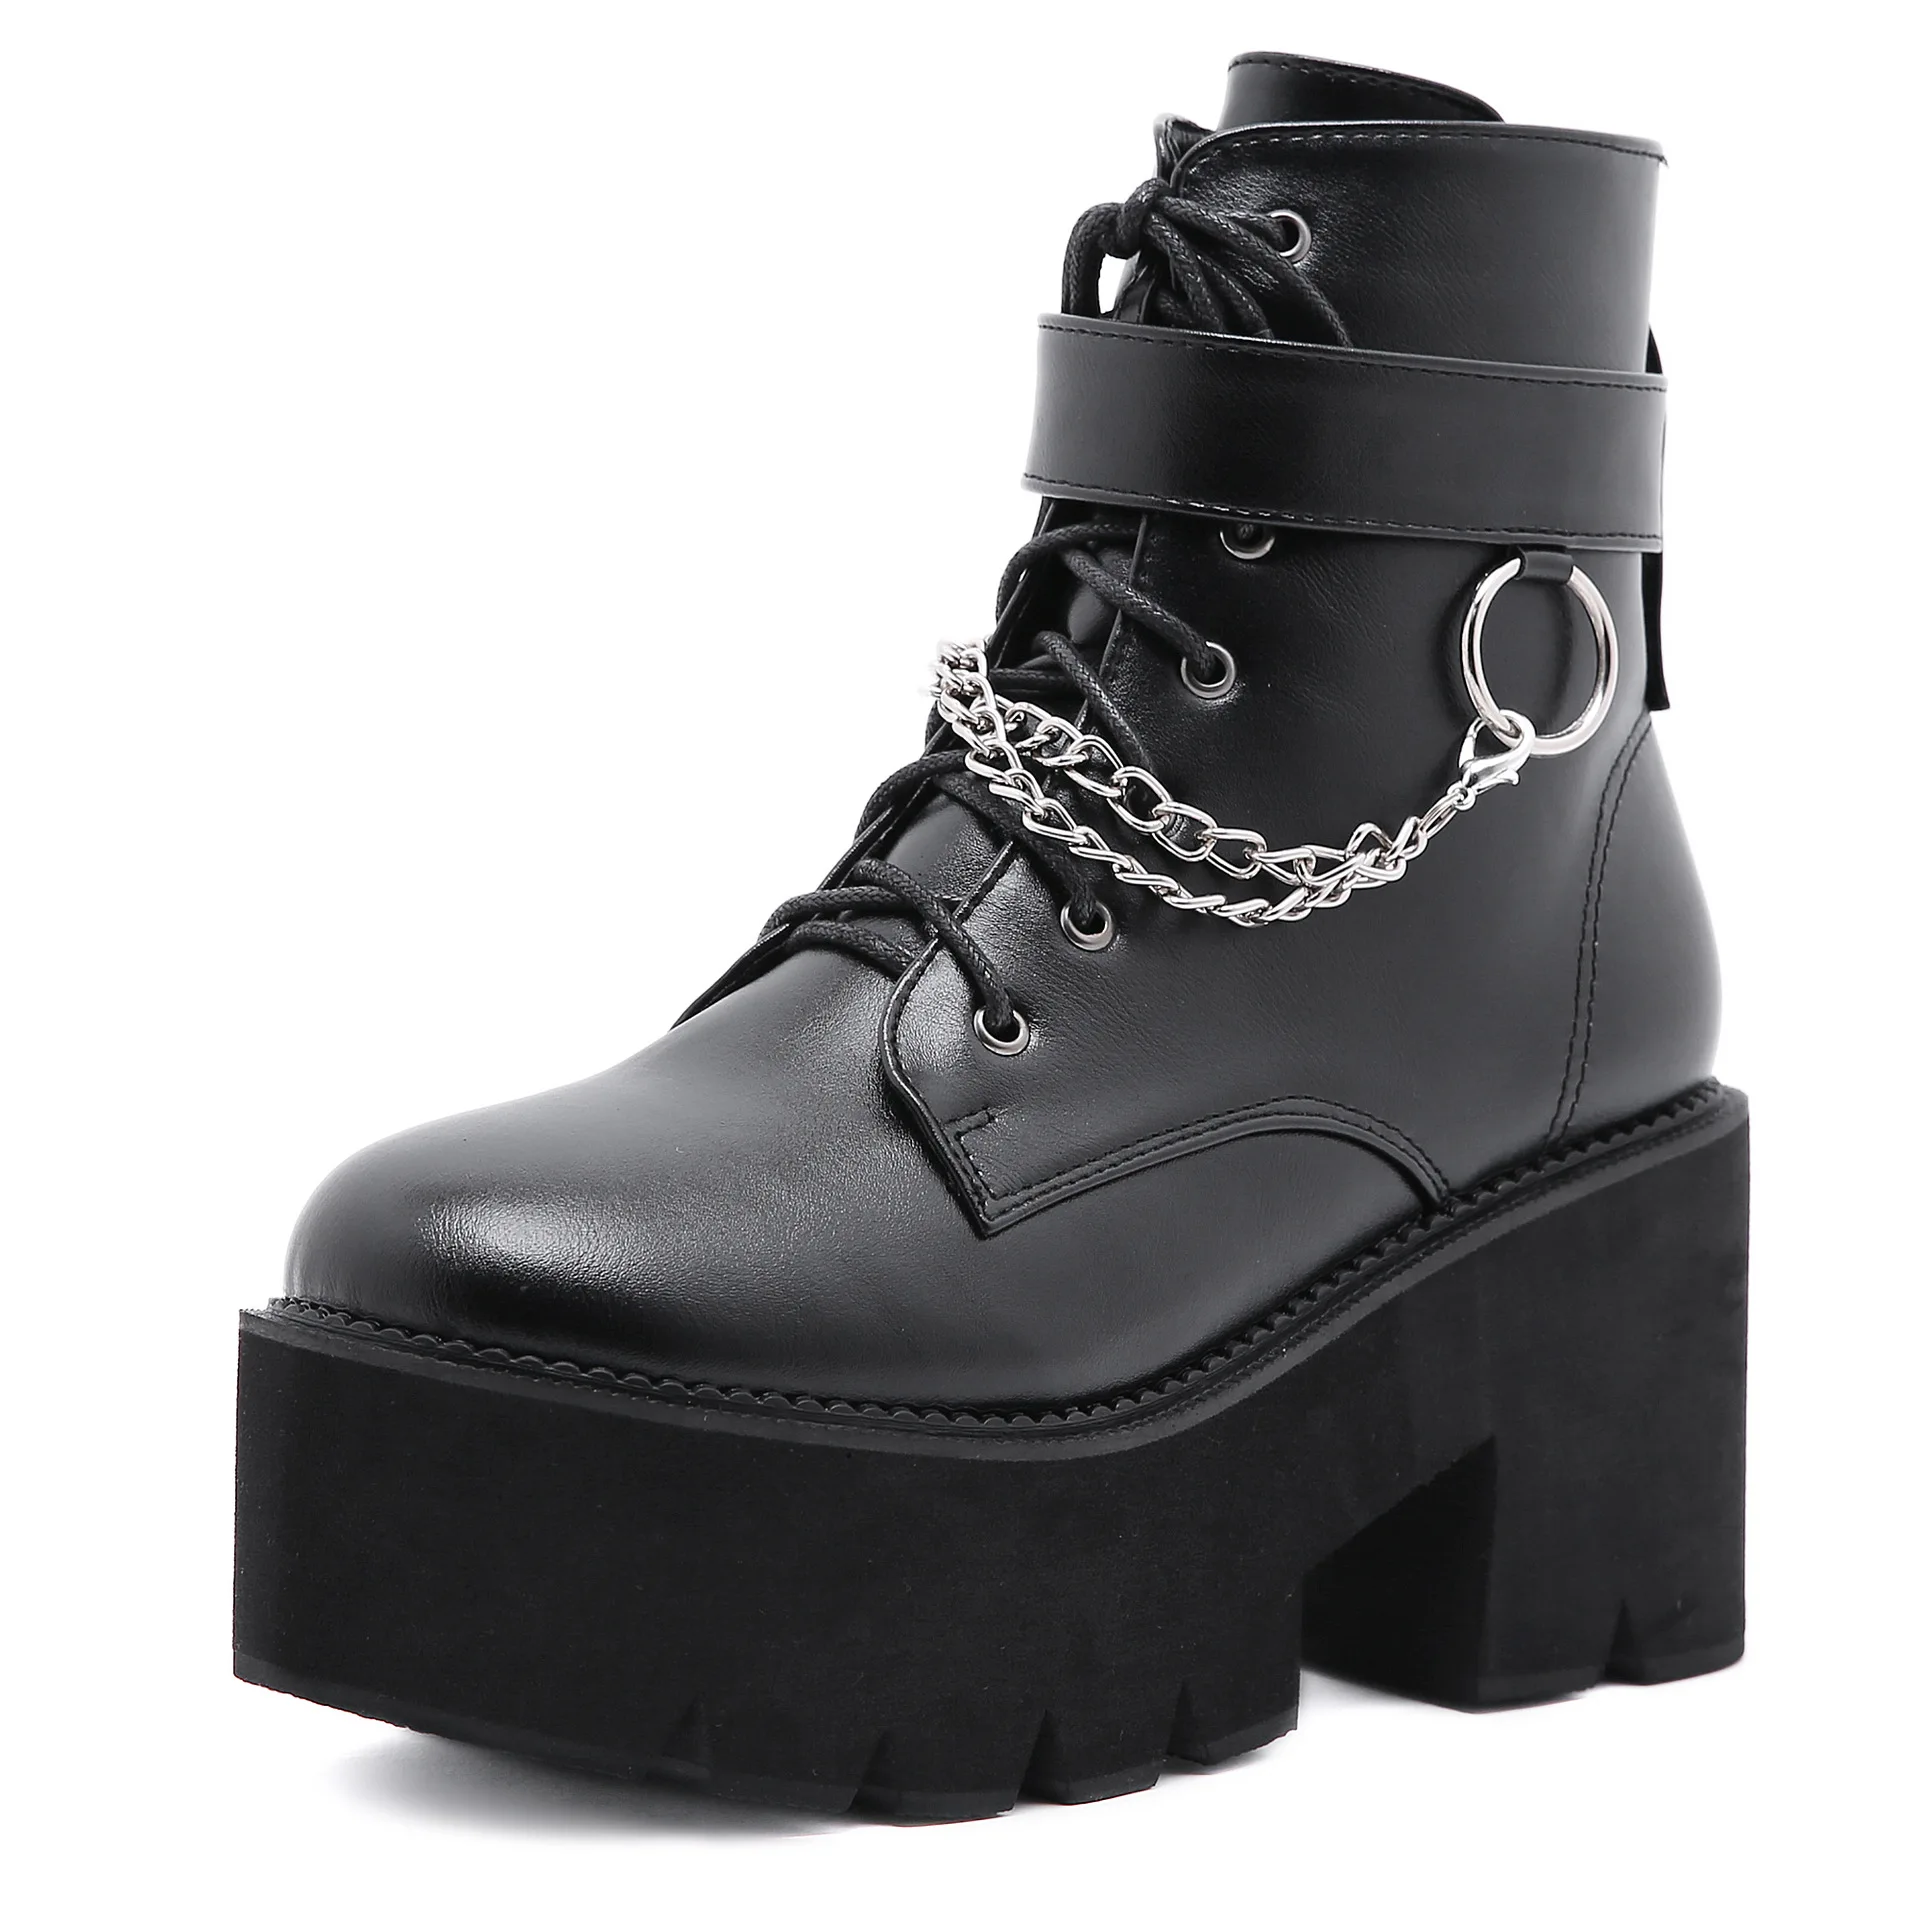 The New Large-size Platform Platform Women's Chunky High-heeled Ankle Boot In 2020